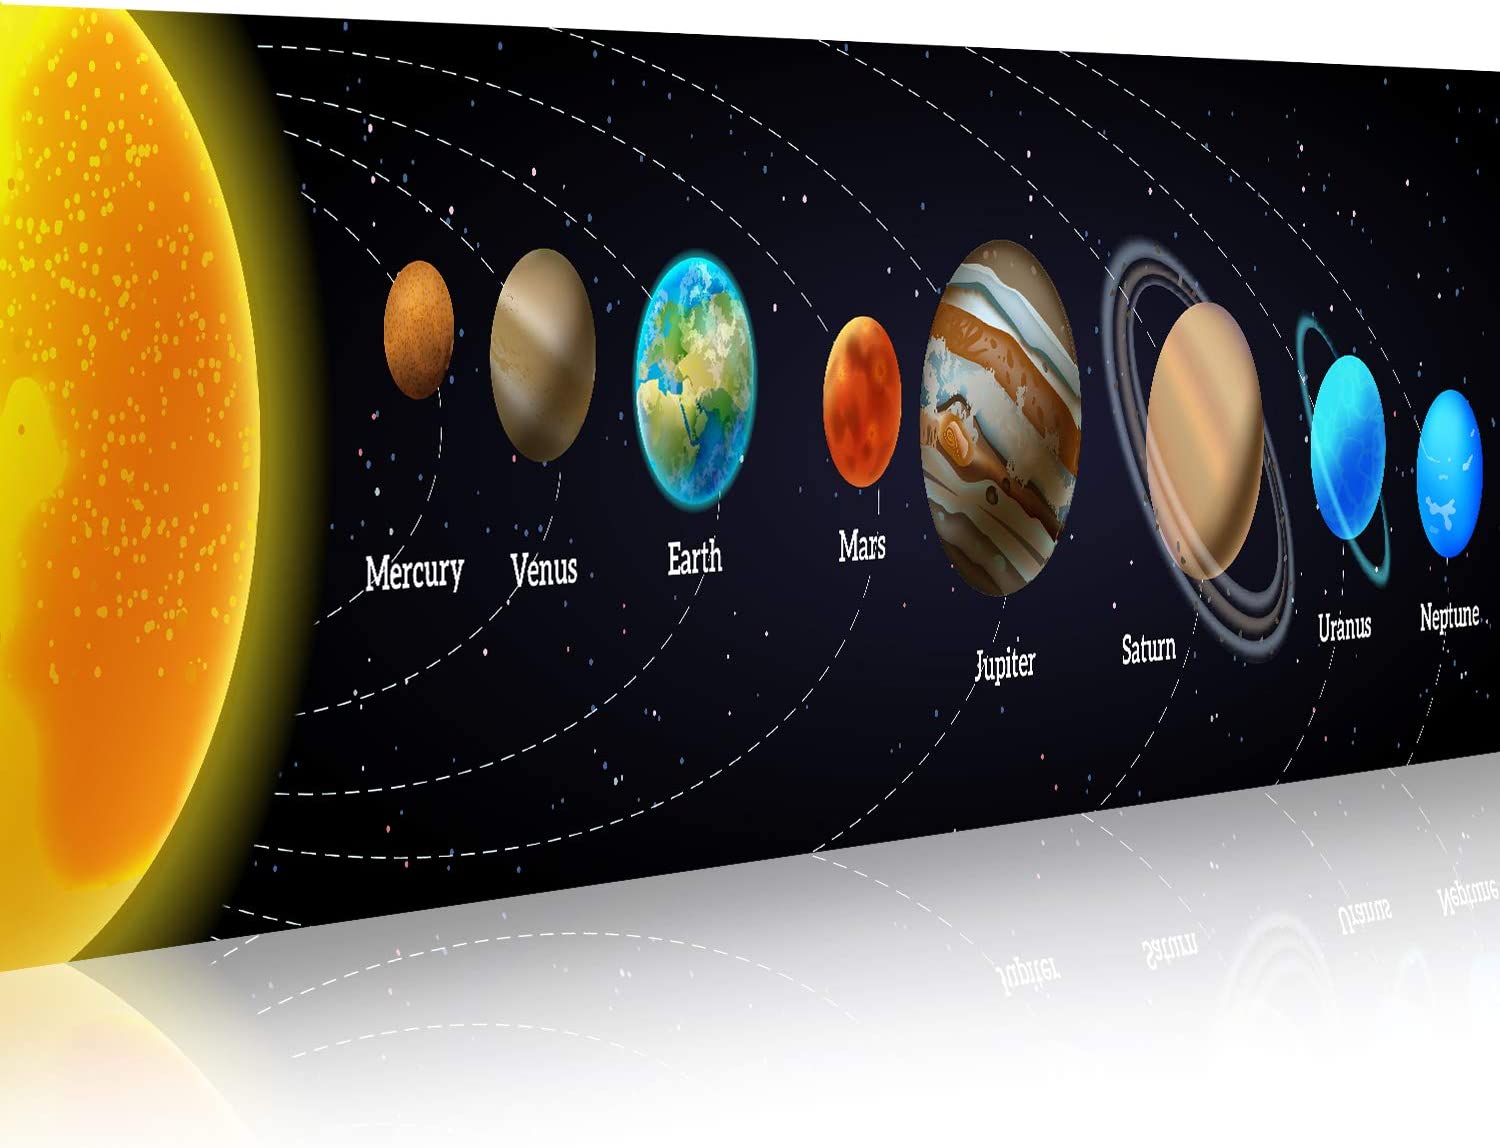 Bigtime Signs Premium Solar System Poster Science Banner 16 inch x 6 feet Image with Detail Stats – Classroom Vinyl Sign – Educational Reference, Space, Vibrant Colors, No Tearing – Space Posters for Kids Room